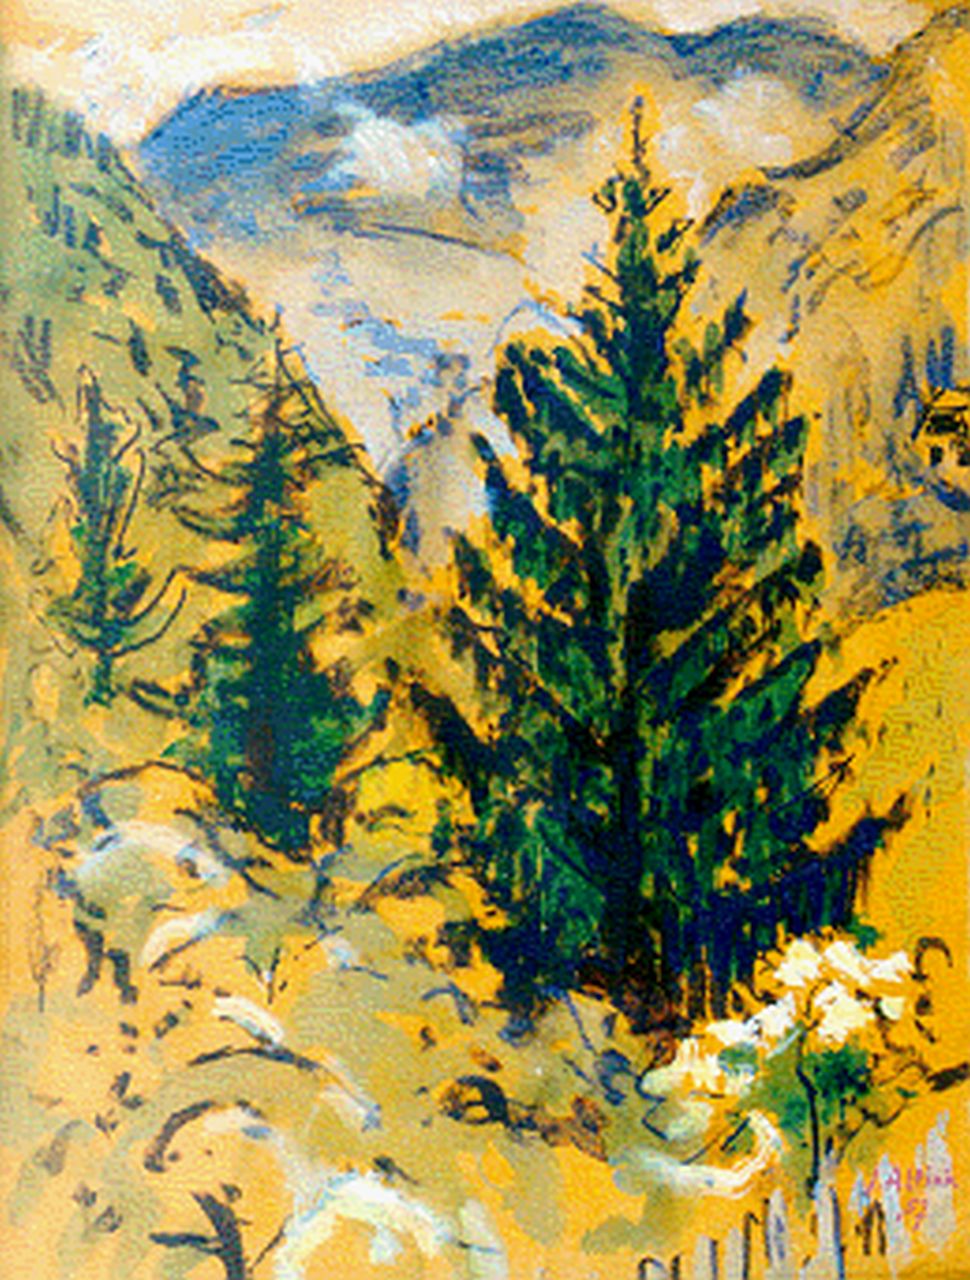 Altink J.  | Jan Altink, Mountain landscape, gouache, watercolour and chalk on paper 64.0 x 49.9 cm, signed l.r. and dated '57